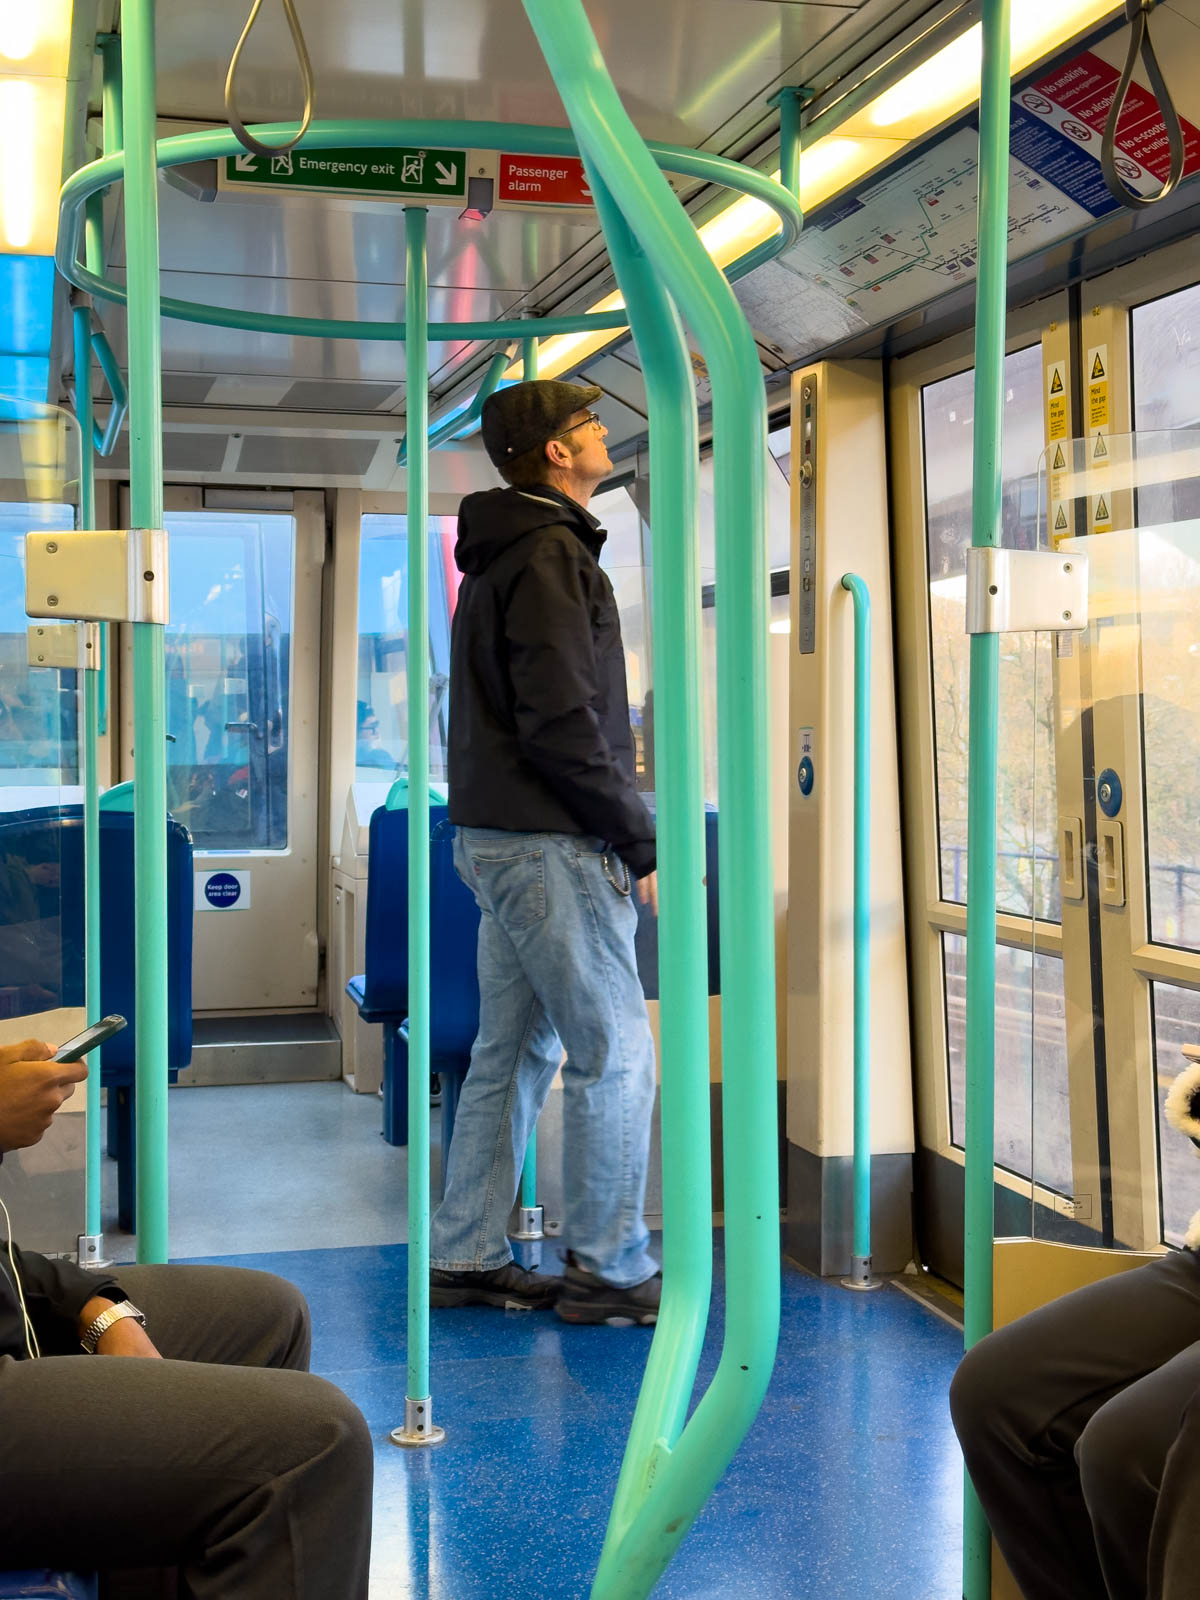 A man looks at the train map while riding the train.